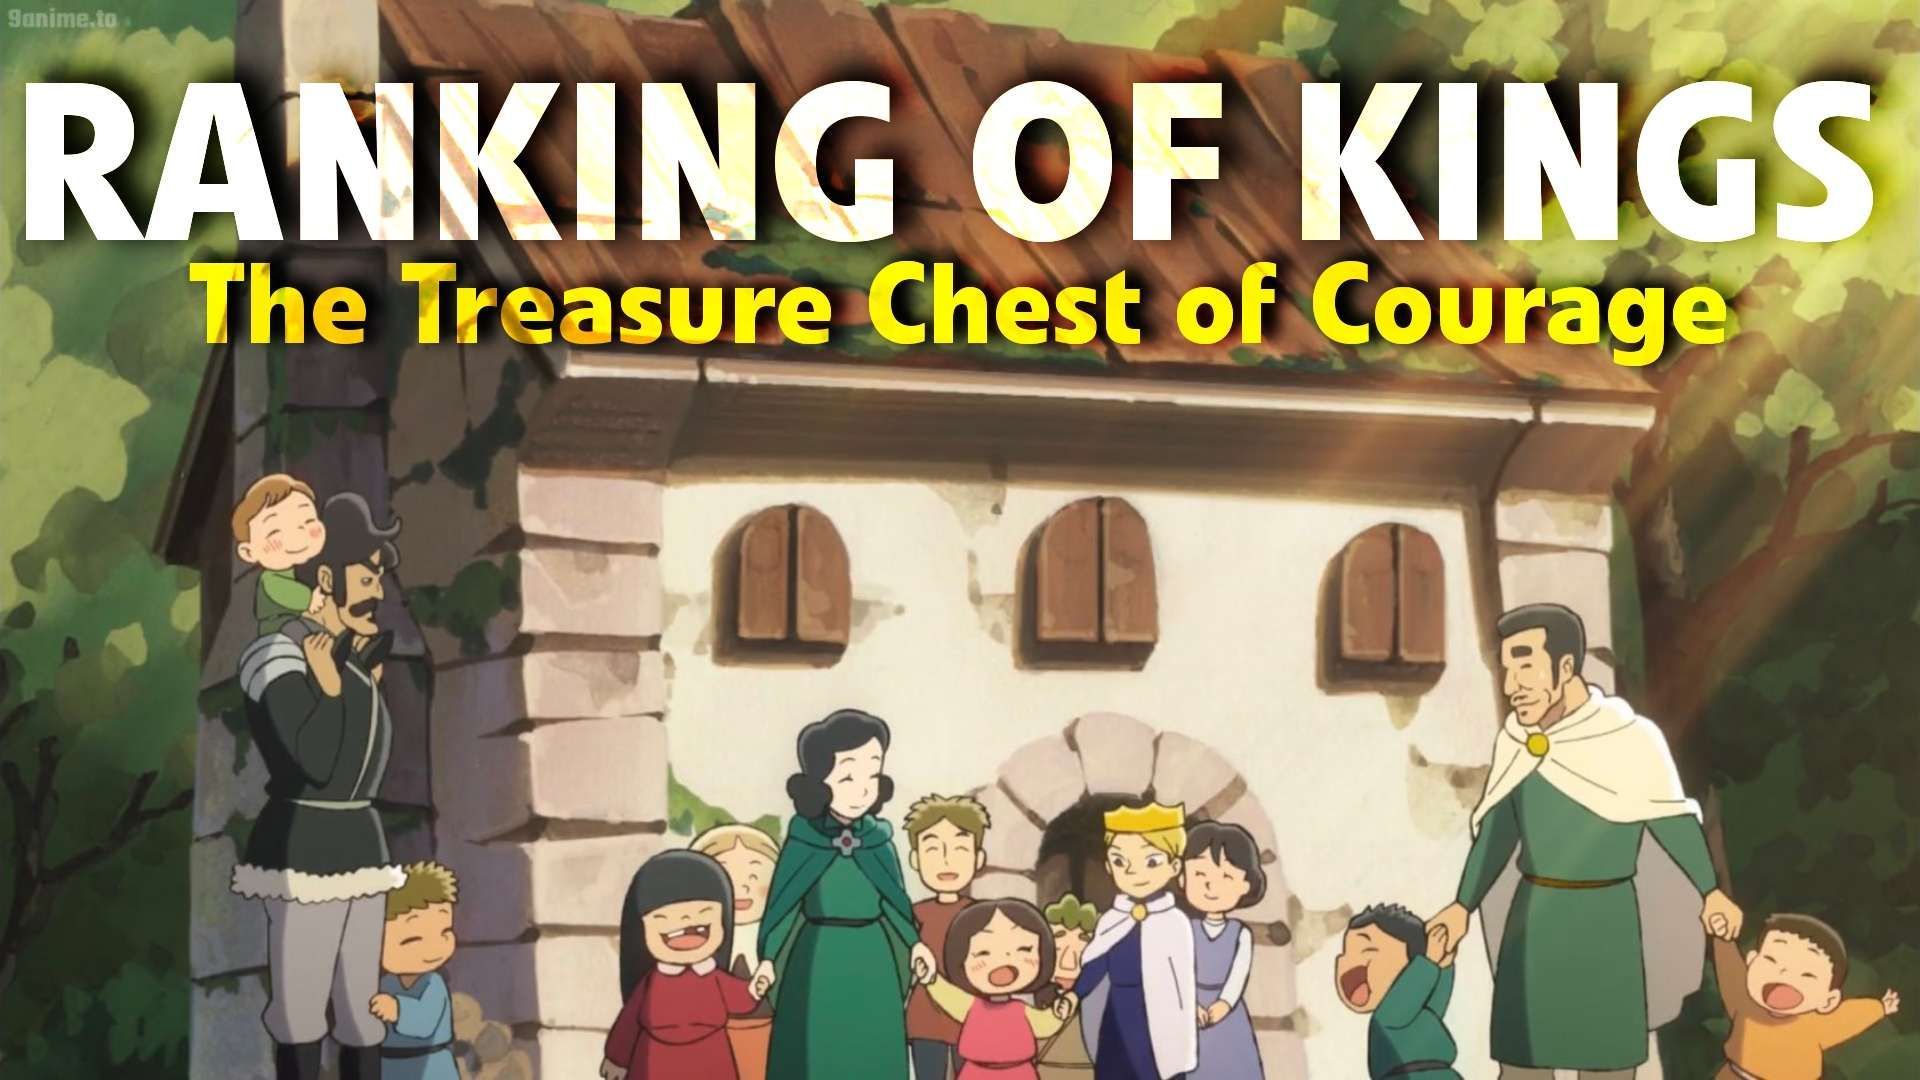 Ranking of Kings: Treasure Chest of Courage